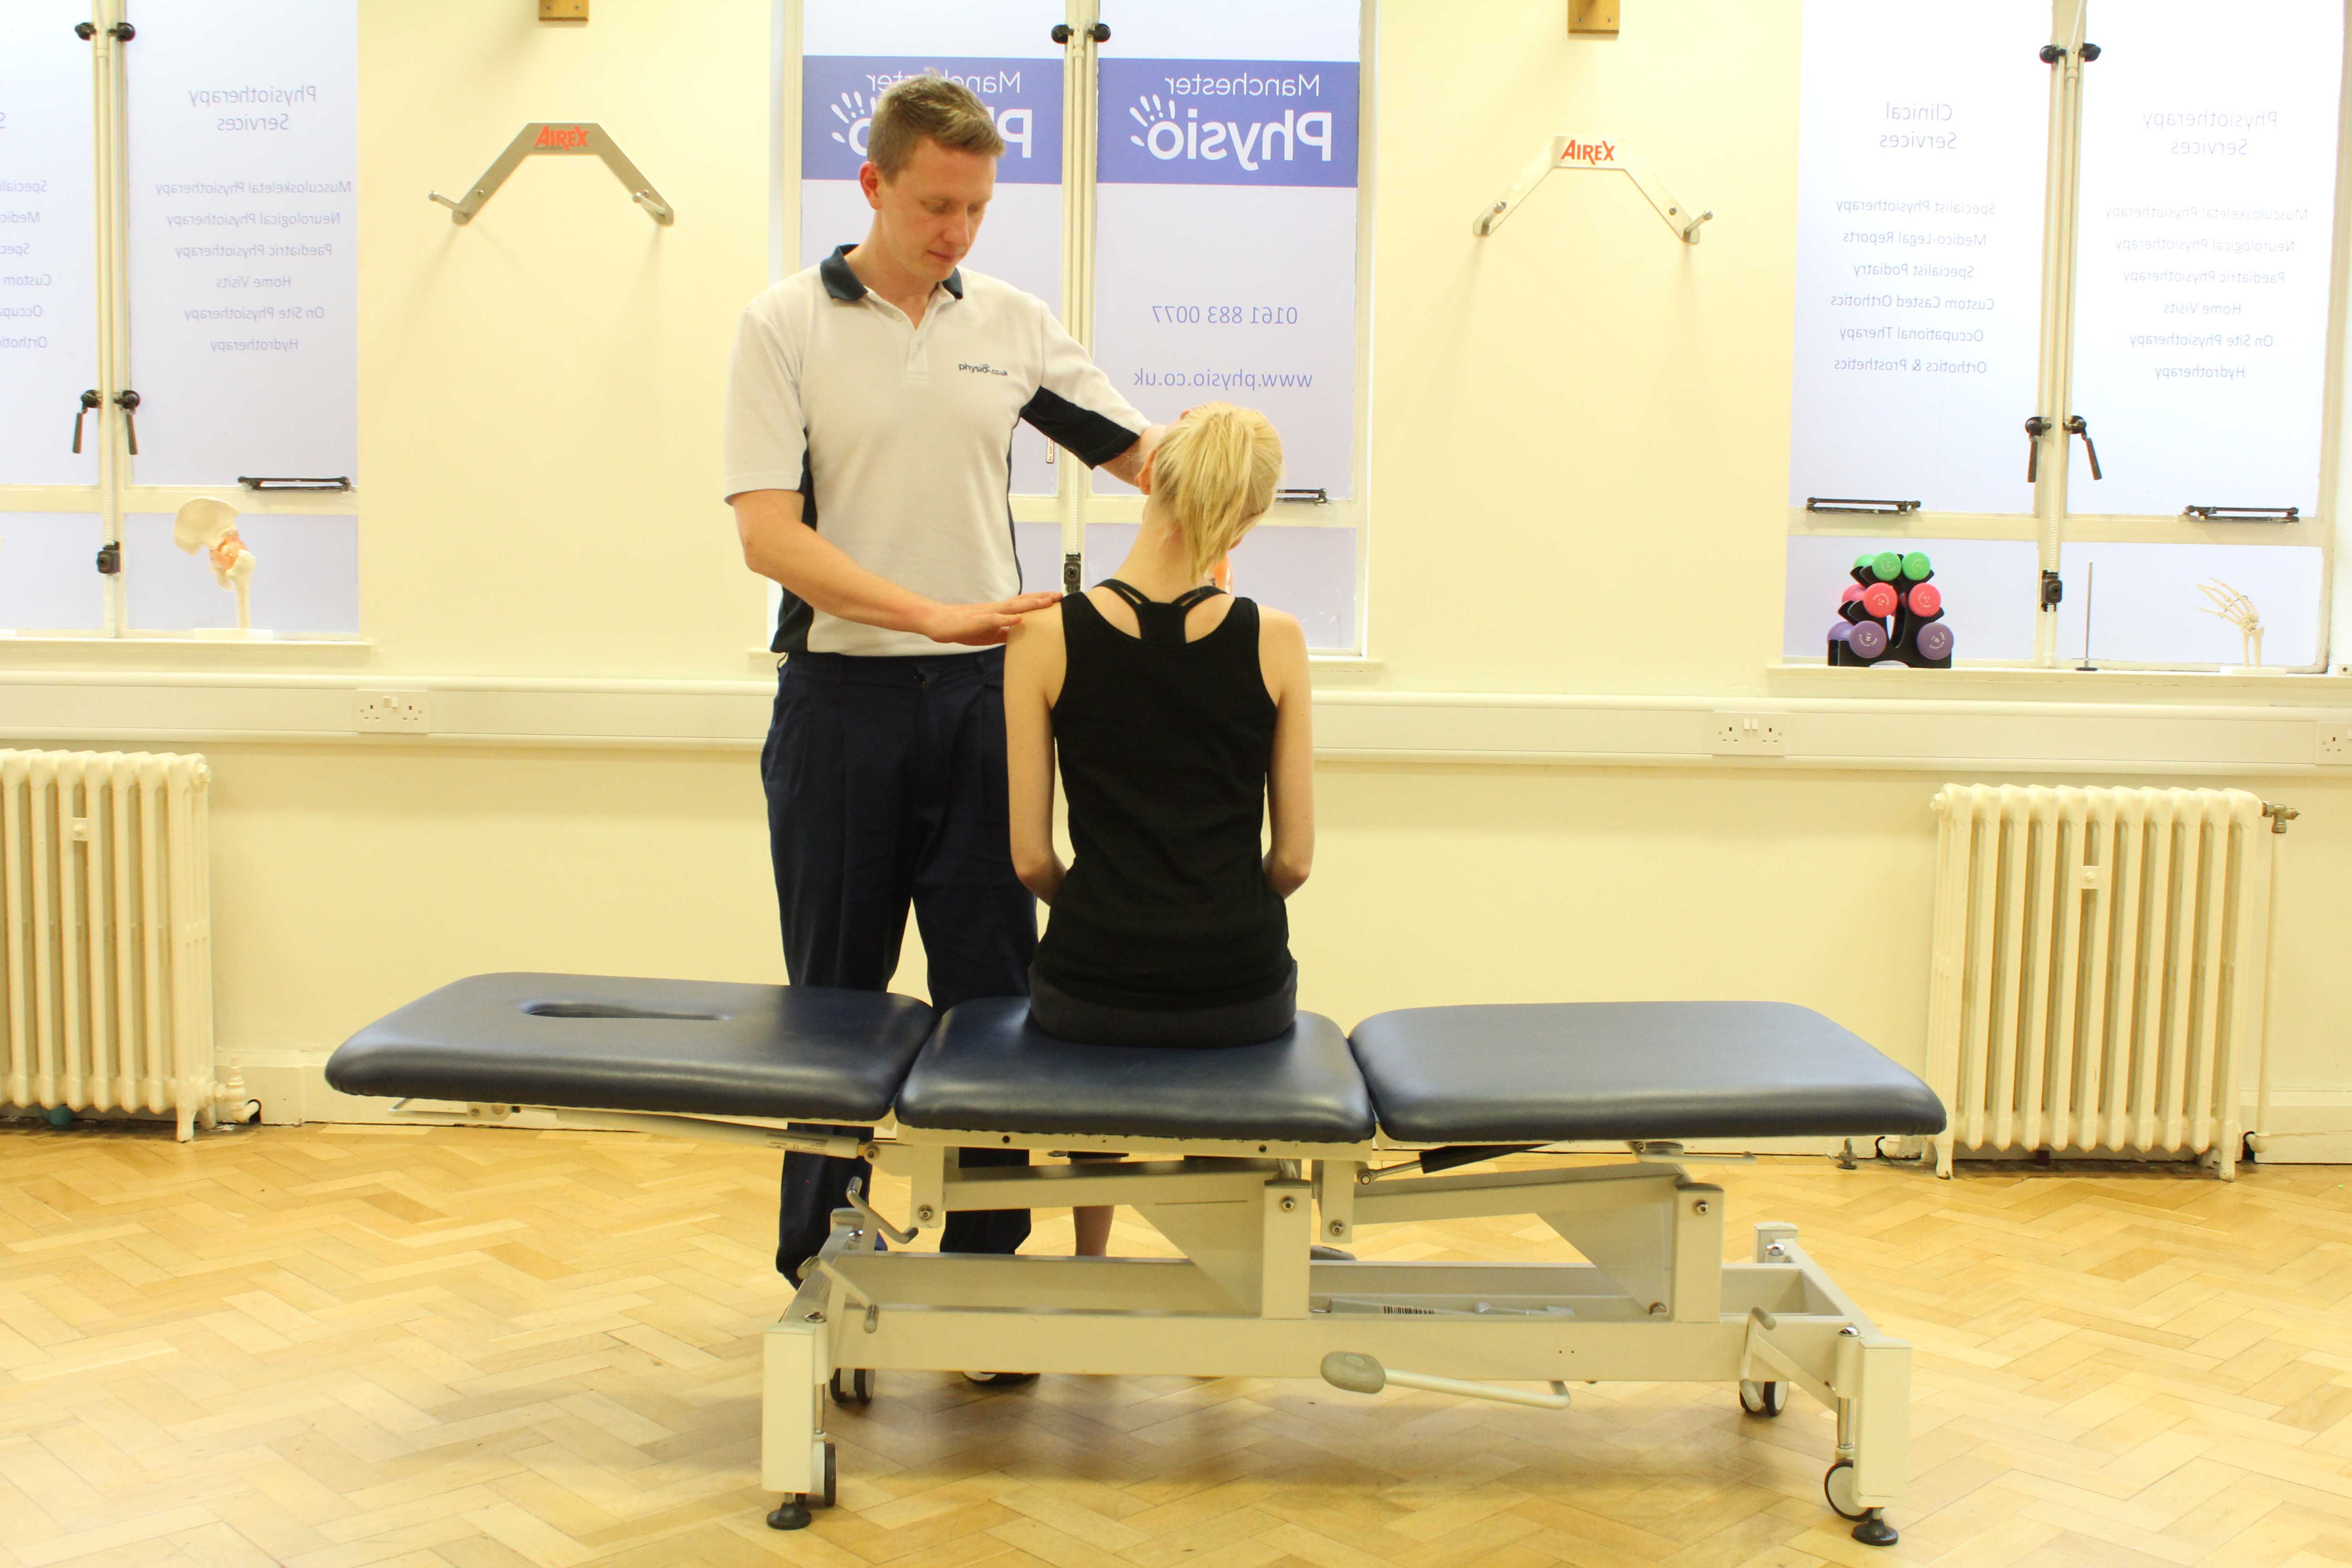 Experienced Physiotherapist conducting an assessment of the cervical spine, muscles and connective tissues in the neck